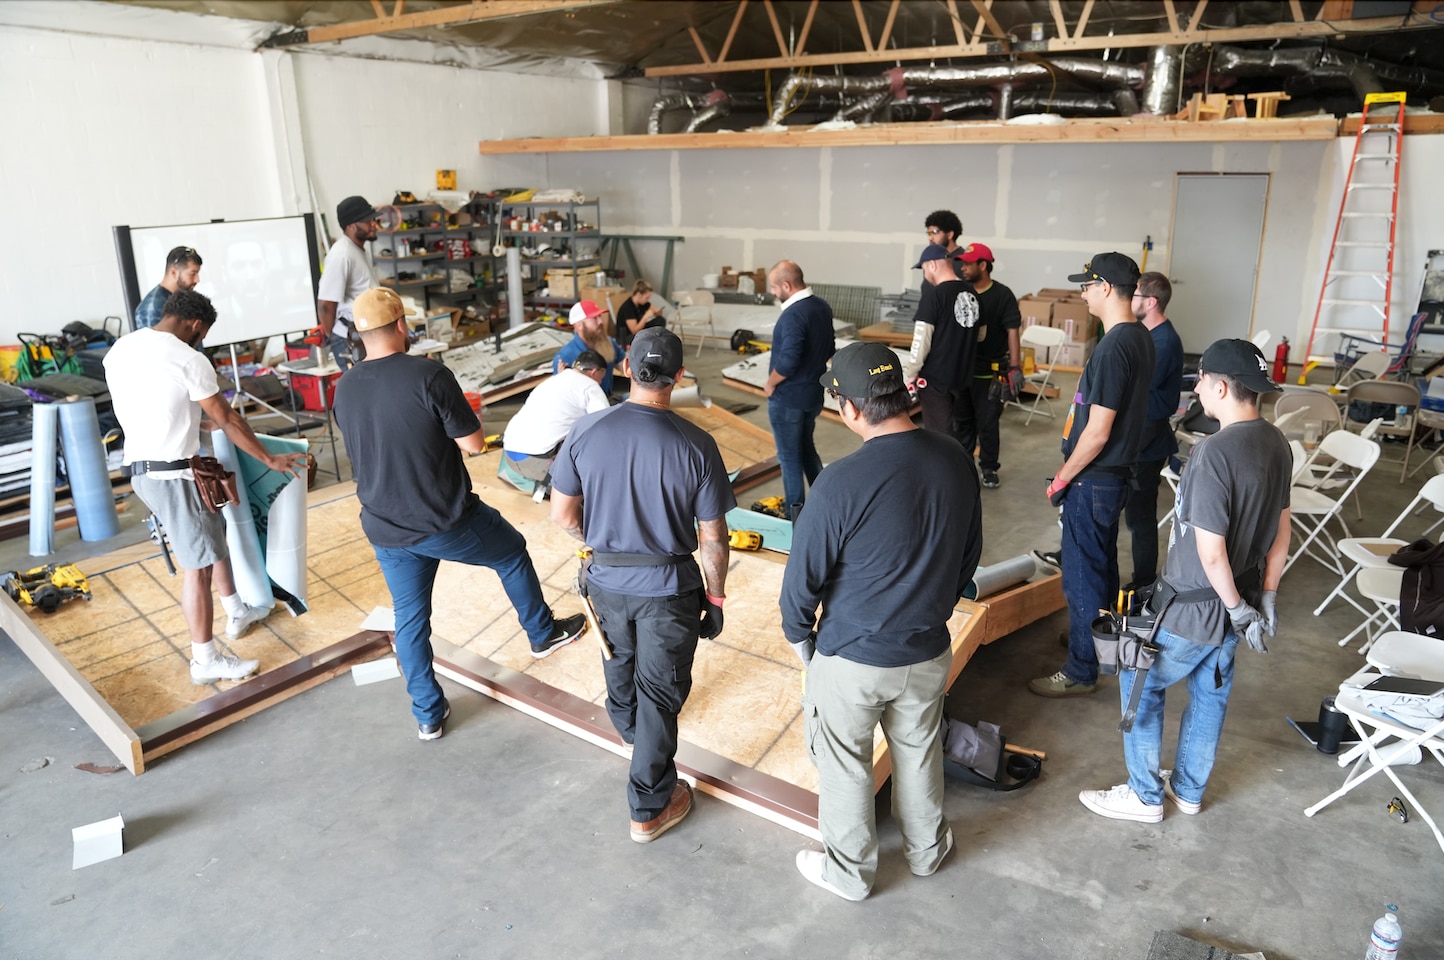 A Roofing Academy Class learning hands-on skills with an instructor